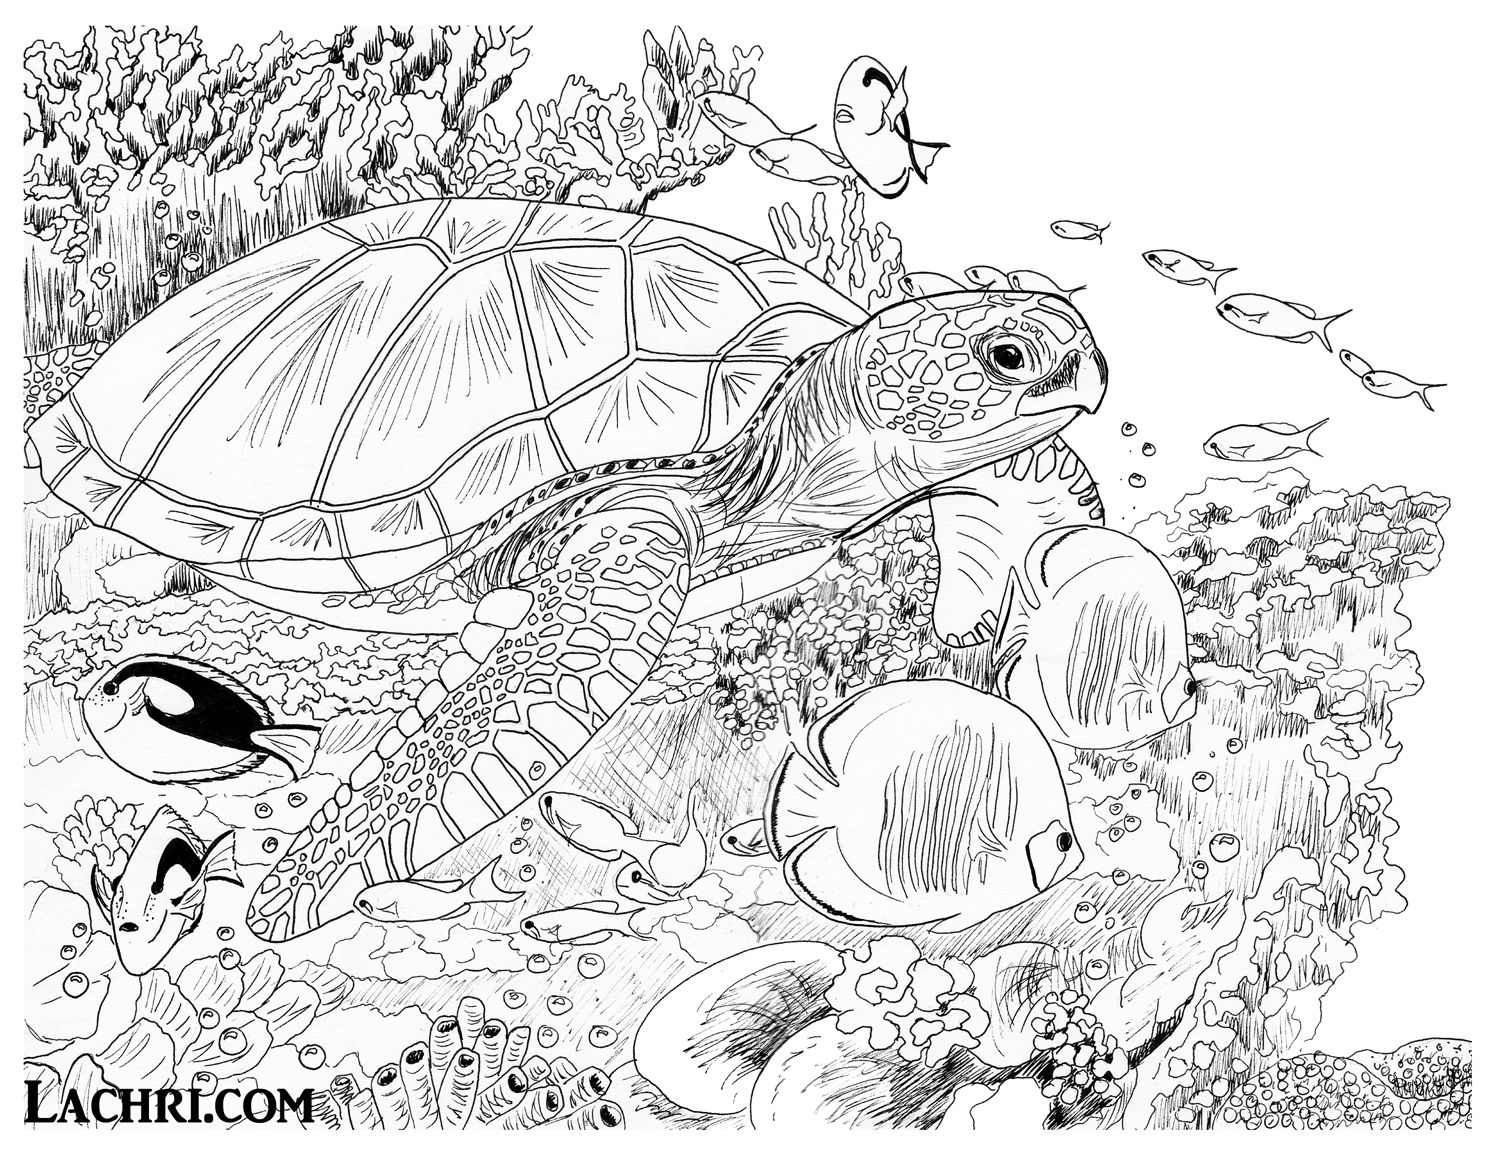 Color this sea turtle underwater scene yourself in my free adult coloring page!